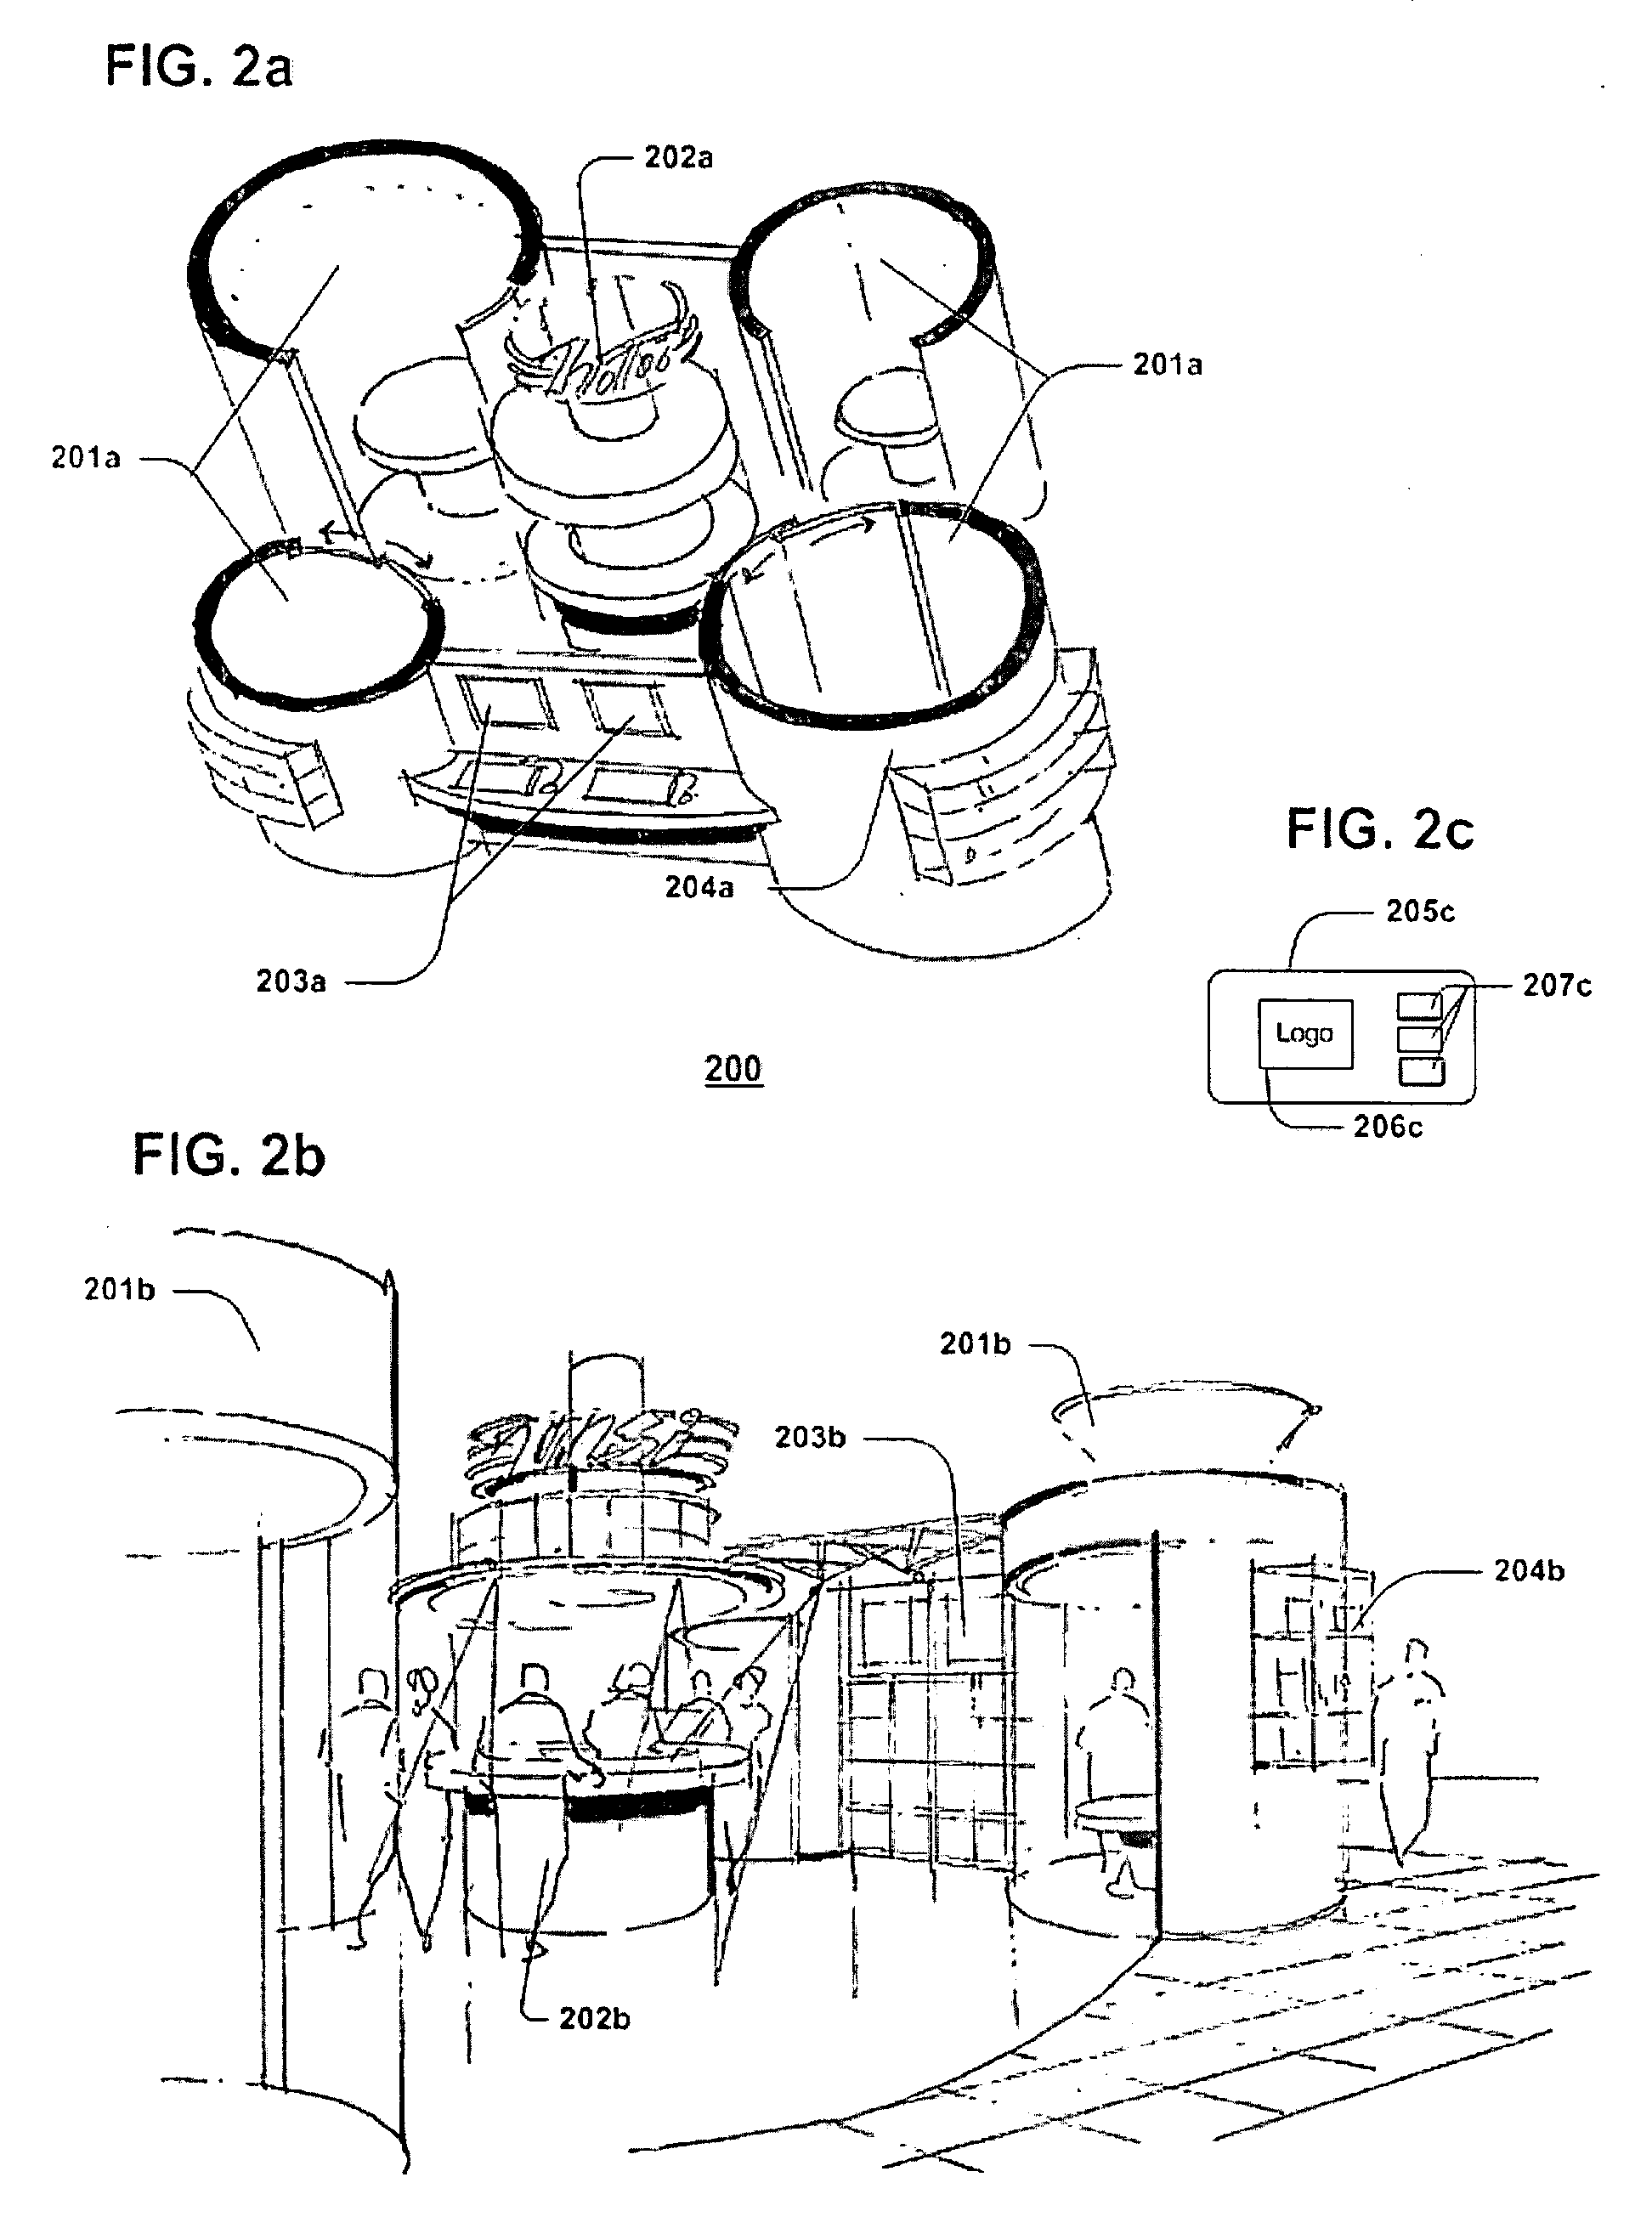 Method for creating, manufacturing, and distributing three-dimensional models